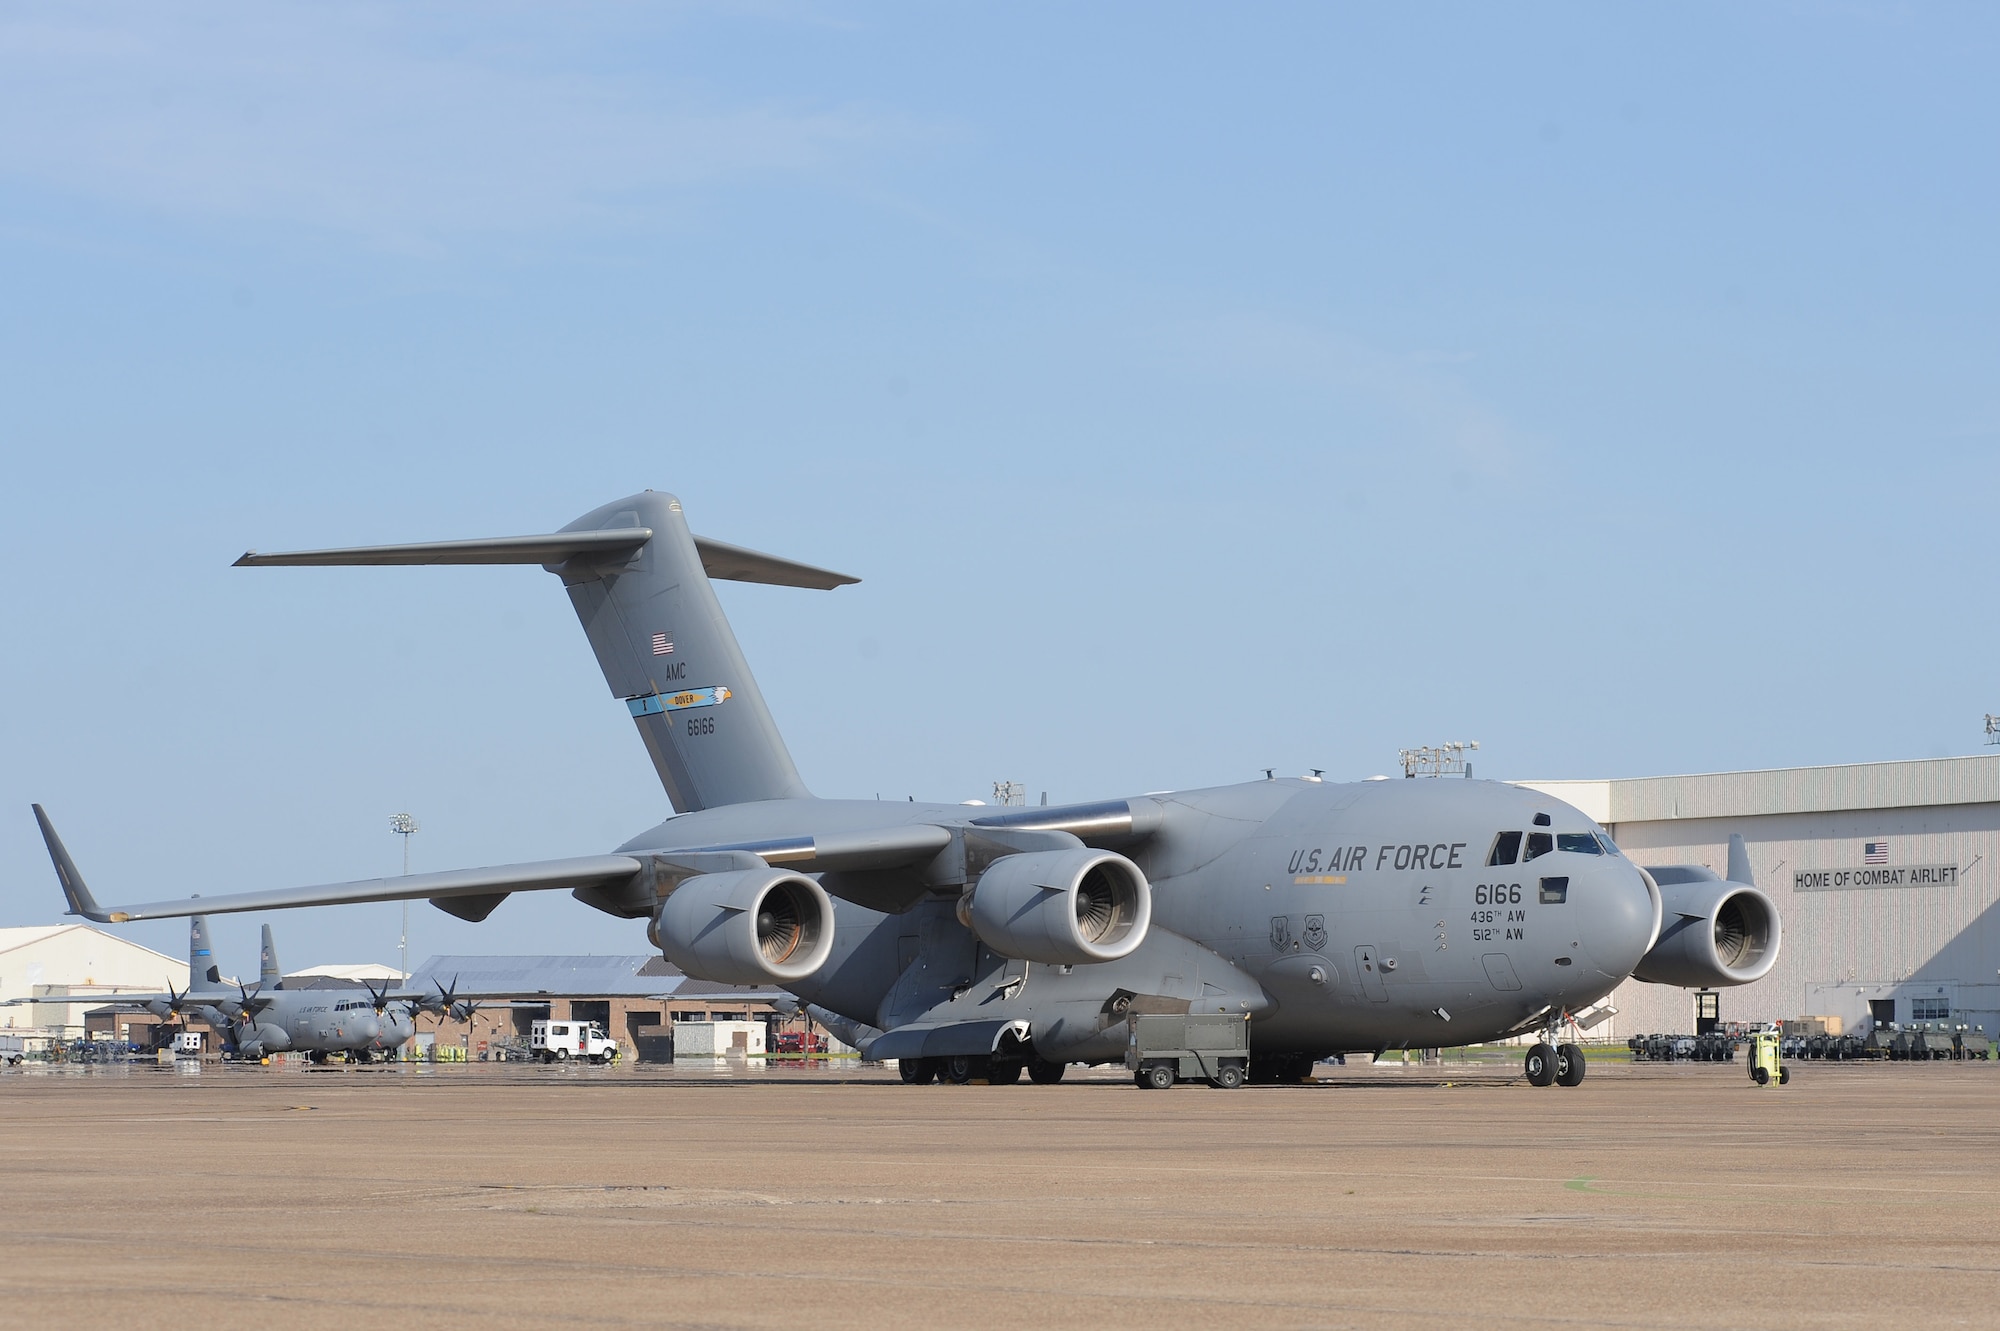 A C-17 Globemaster III, from Dover Air Force Base, Del., is parked on a ramp at Little Rock Air Force Base, Ark., on Aug. 27, 2011. Six C-17 cargo planes were flown to Little Rock AFB to save the aircraft from possible damage that could be inflicted by Hurricane Irene striking the East Coast. (U.S. Air Force photo by Tech. Sgt. Chad Chisholm)